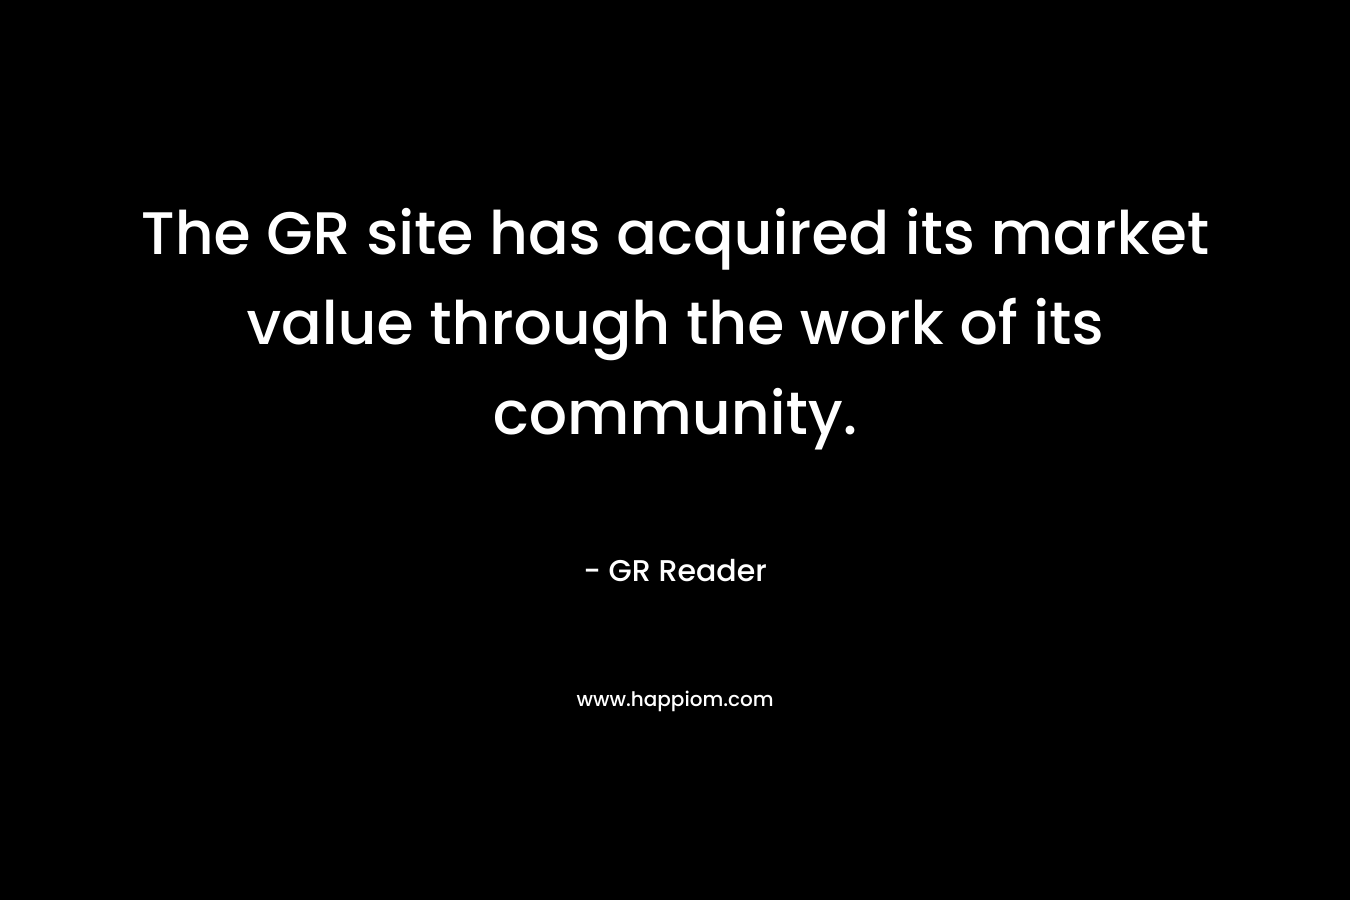 The GR site has acquired its market value through the work of its community.